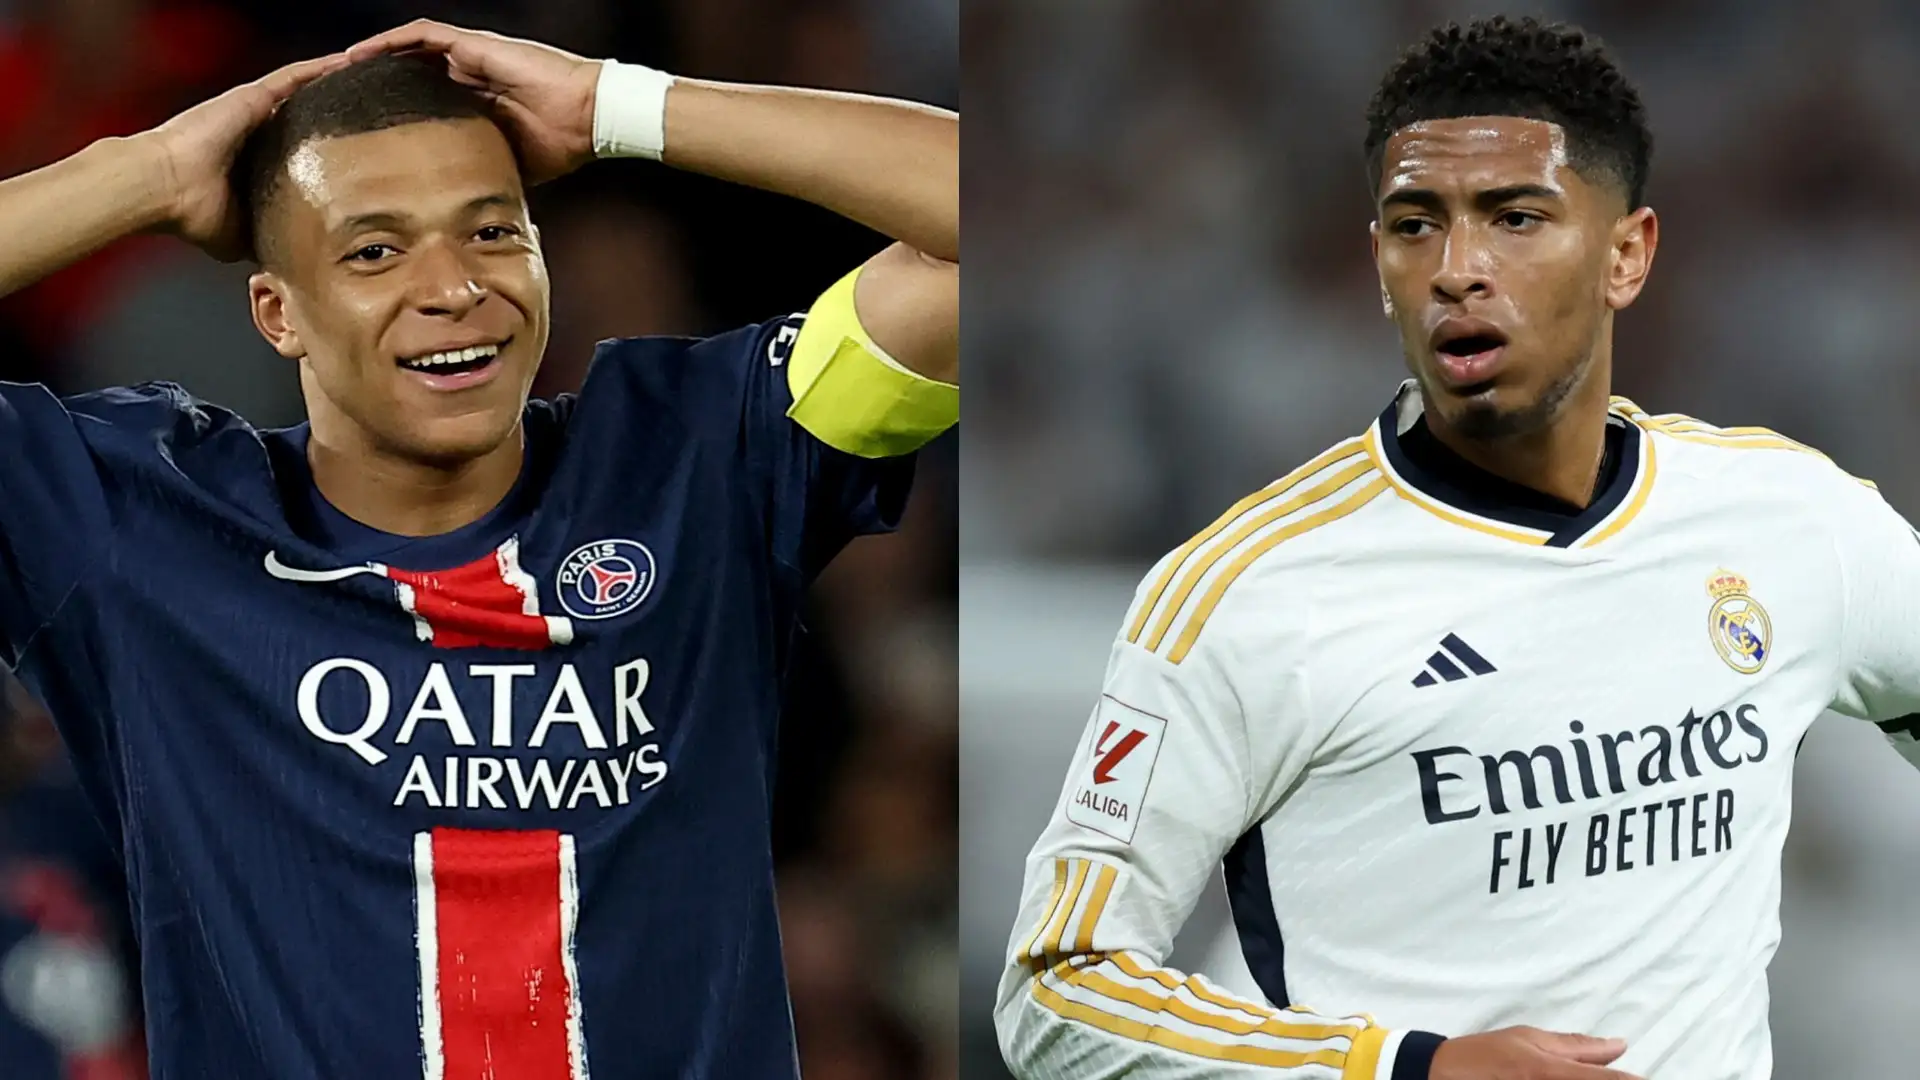 Big change for Jude Bellingham! Kylian Mbappe arrival will see Real Madrid use England star in different role despite stunning debut season